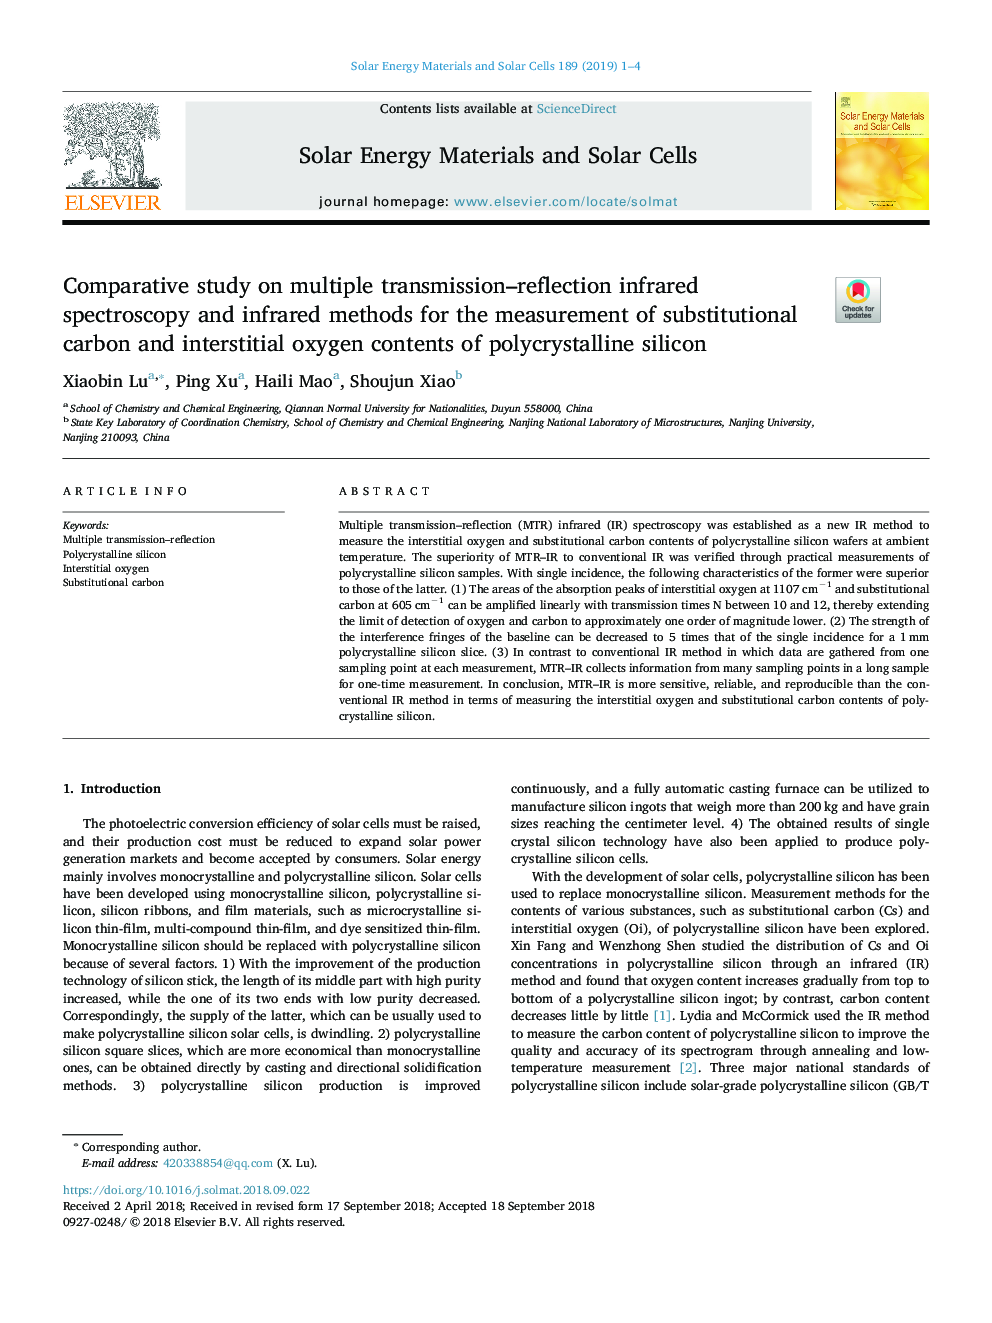 Comparative study on multiple transmission-reflection infrared spectroscopy and infrared methods for the measurement of substitutional carbon and interstitial oxygen contents of polycrystalline silicon